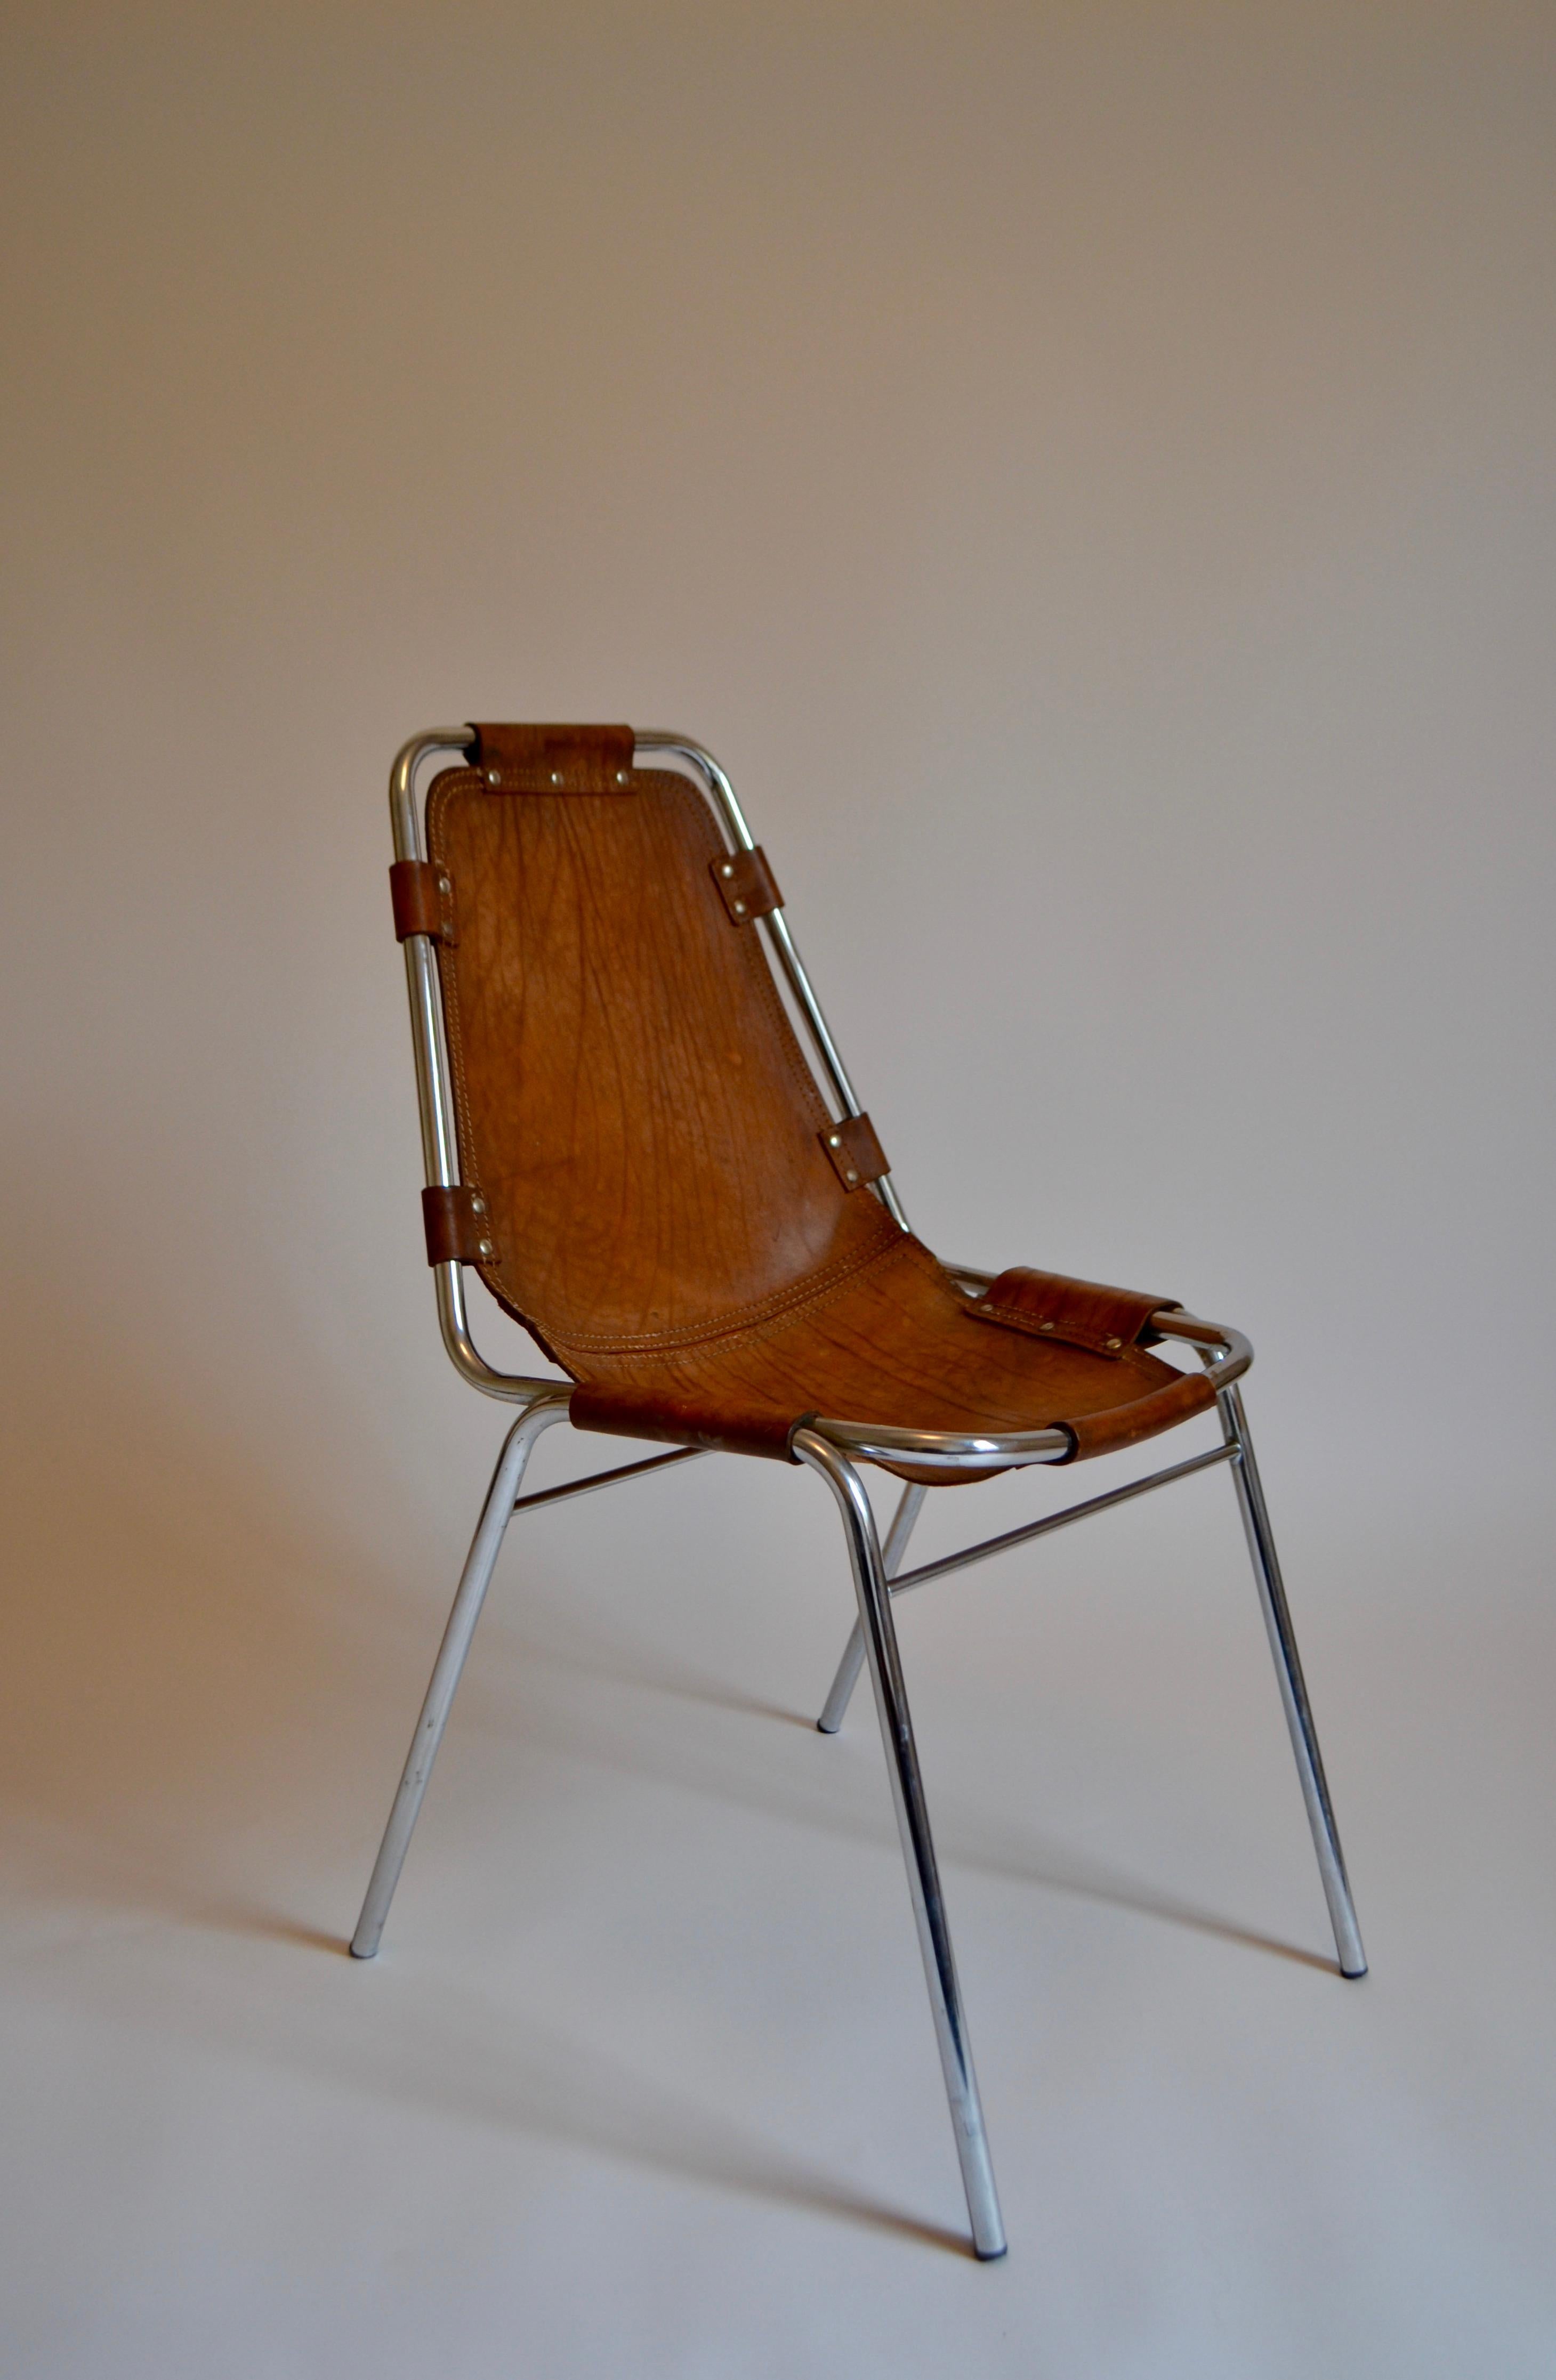 Les Arcs chair designed by Charlotte Perriand for the Les Arcs ski resort in Savoie, in the late 1960s. Cognac leather seat on a tubular chrome frame. Creasing and wear to the leather as pictured.